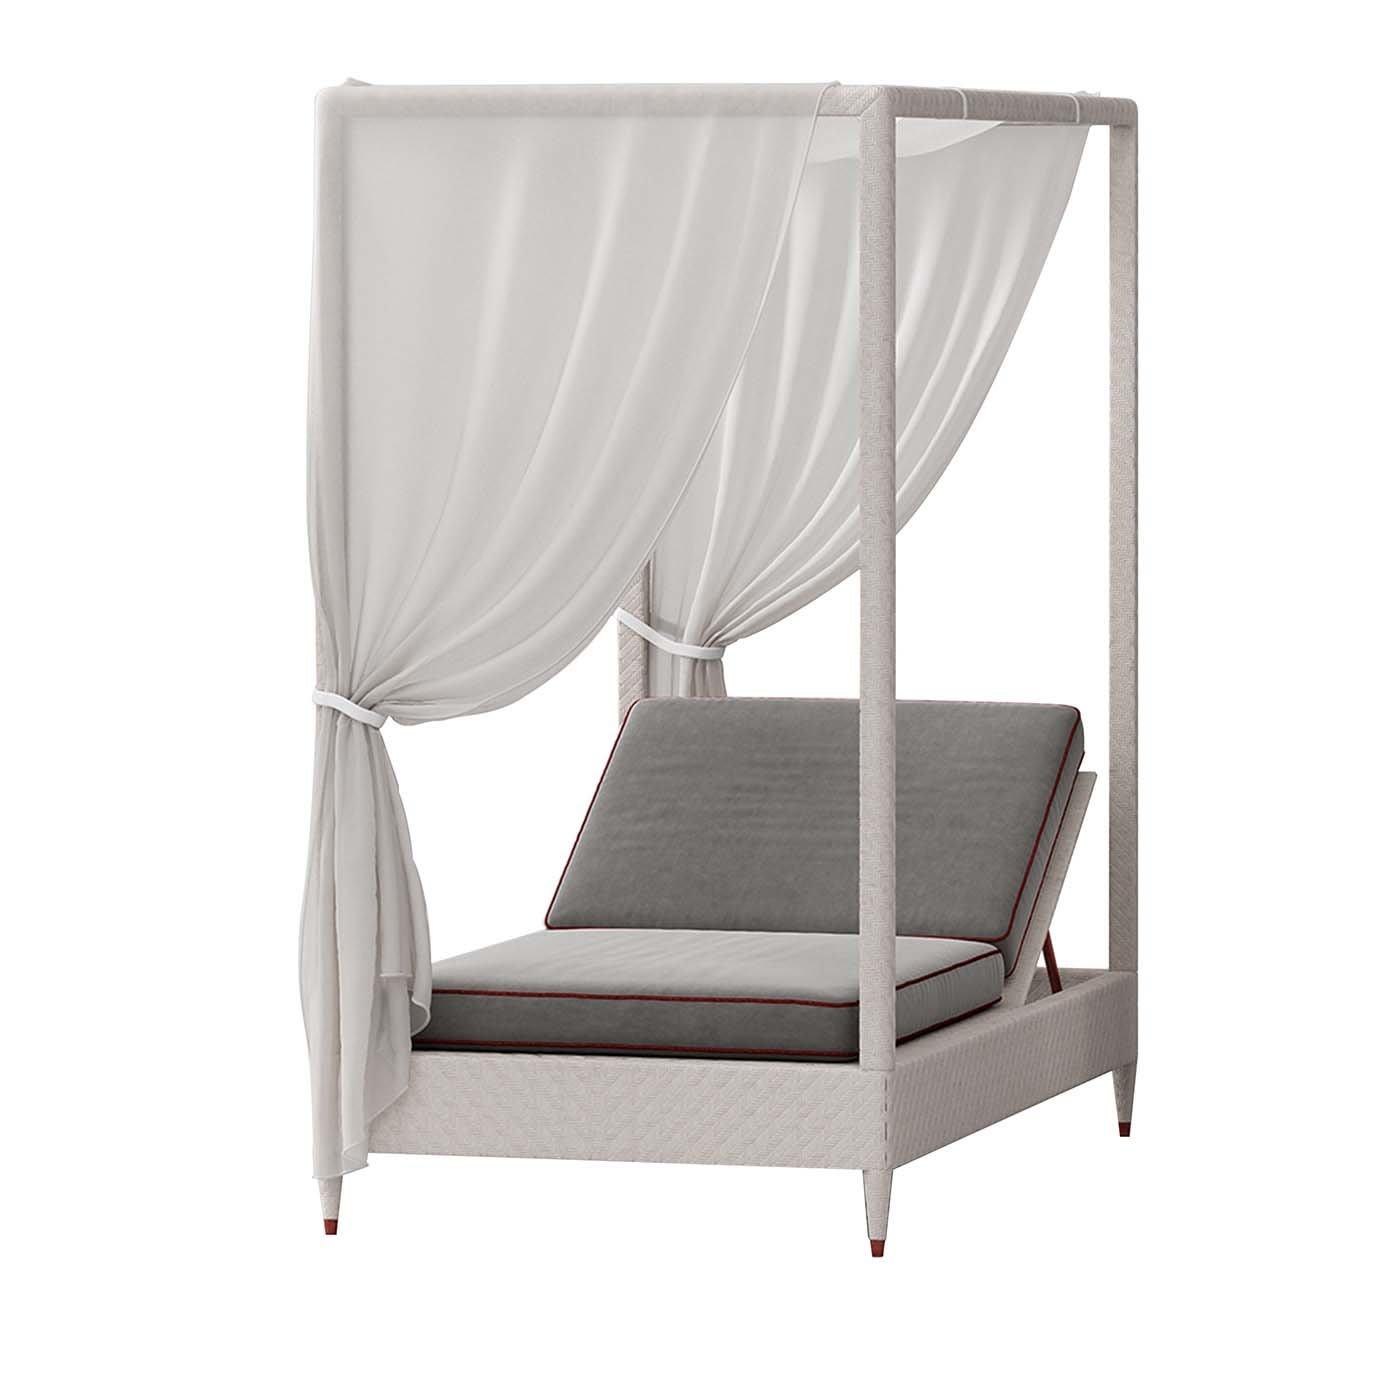 White 1-Seater Daybed with Canopy - CPRN Homood